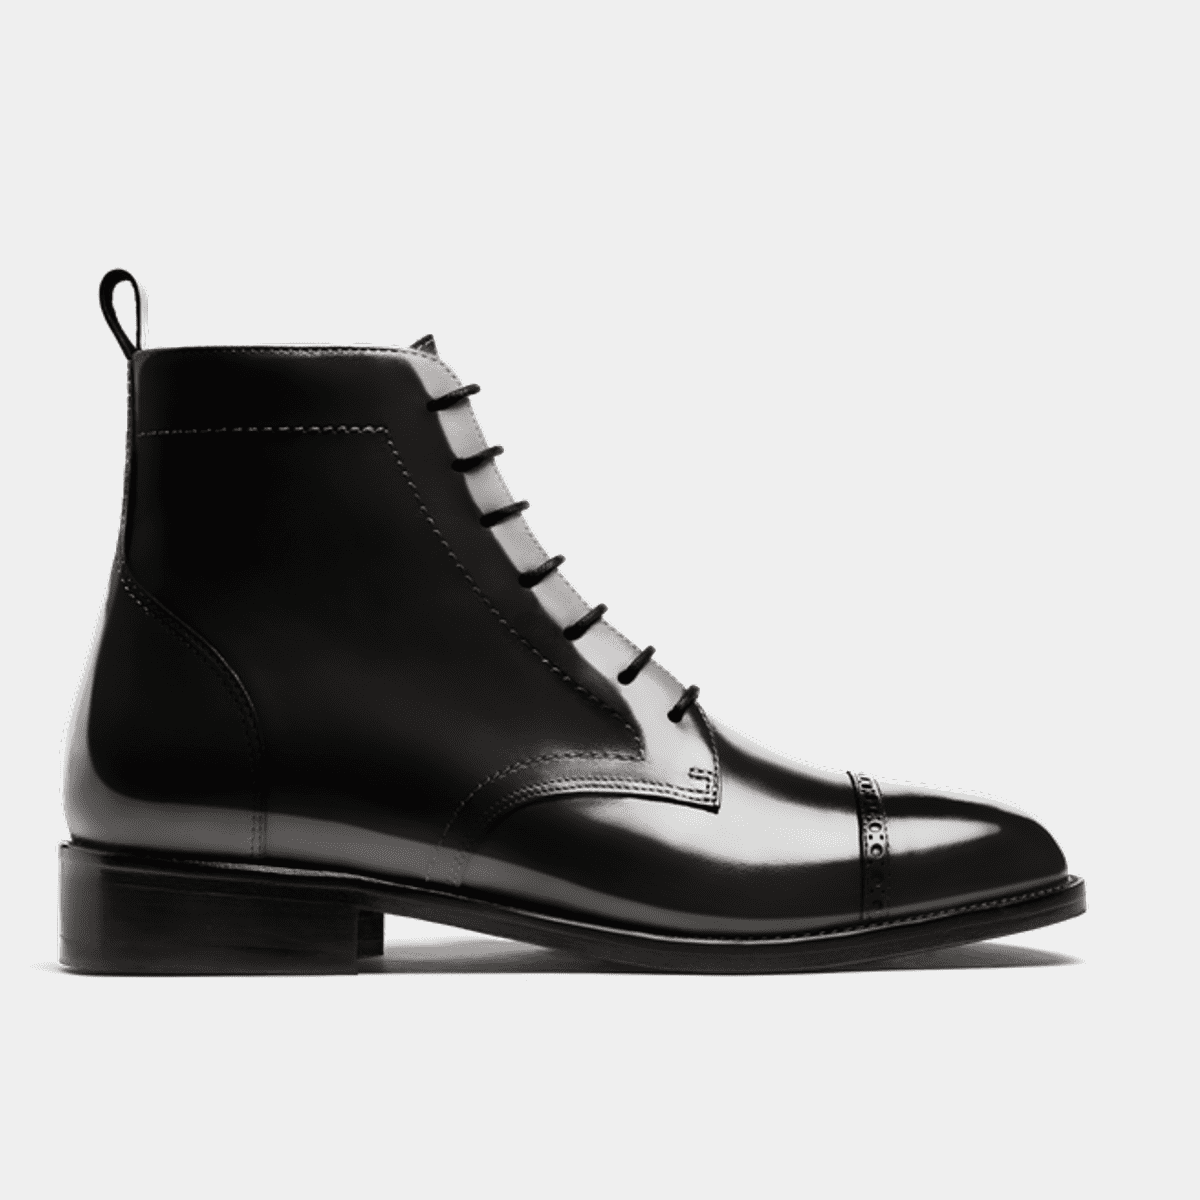 Brogue Boots - black flora leather | Sumissura